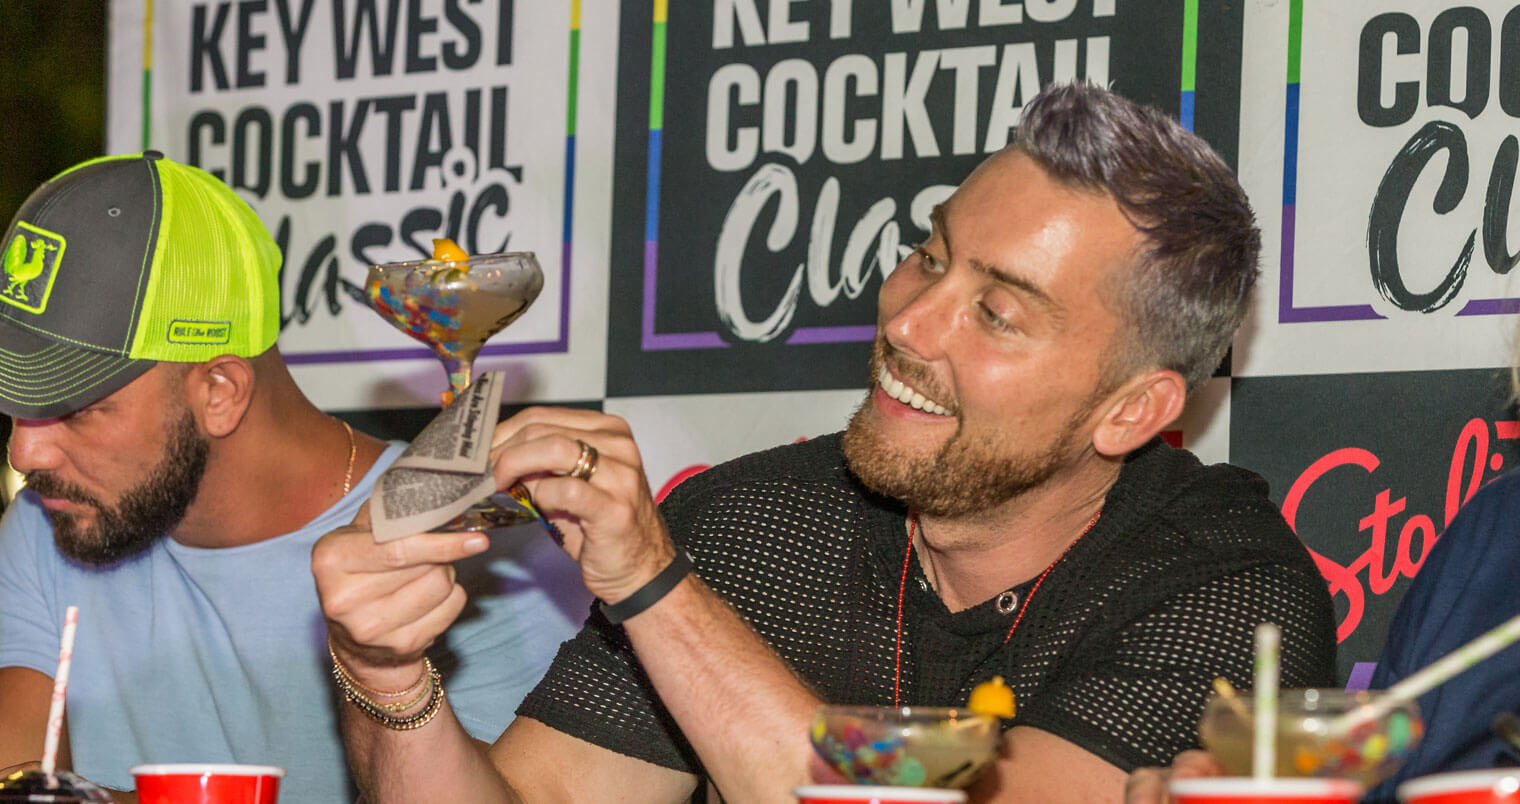 Lance Bass Judging, holding cocktail entry, featured image